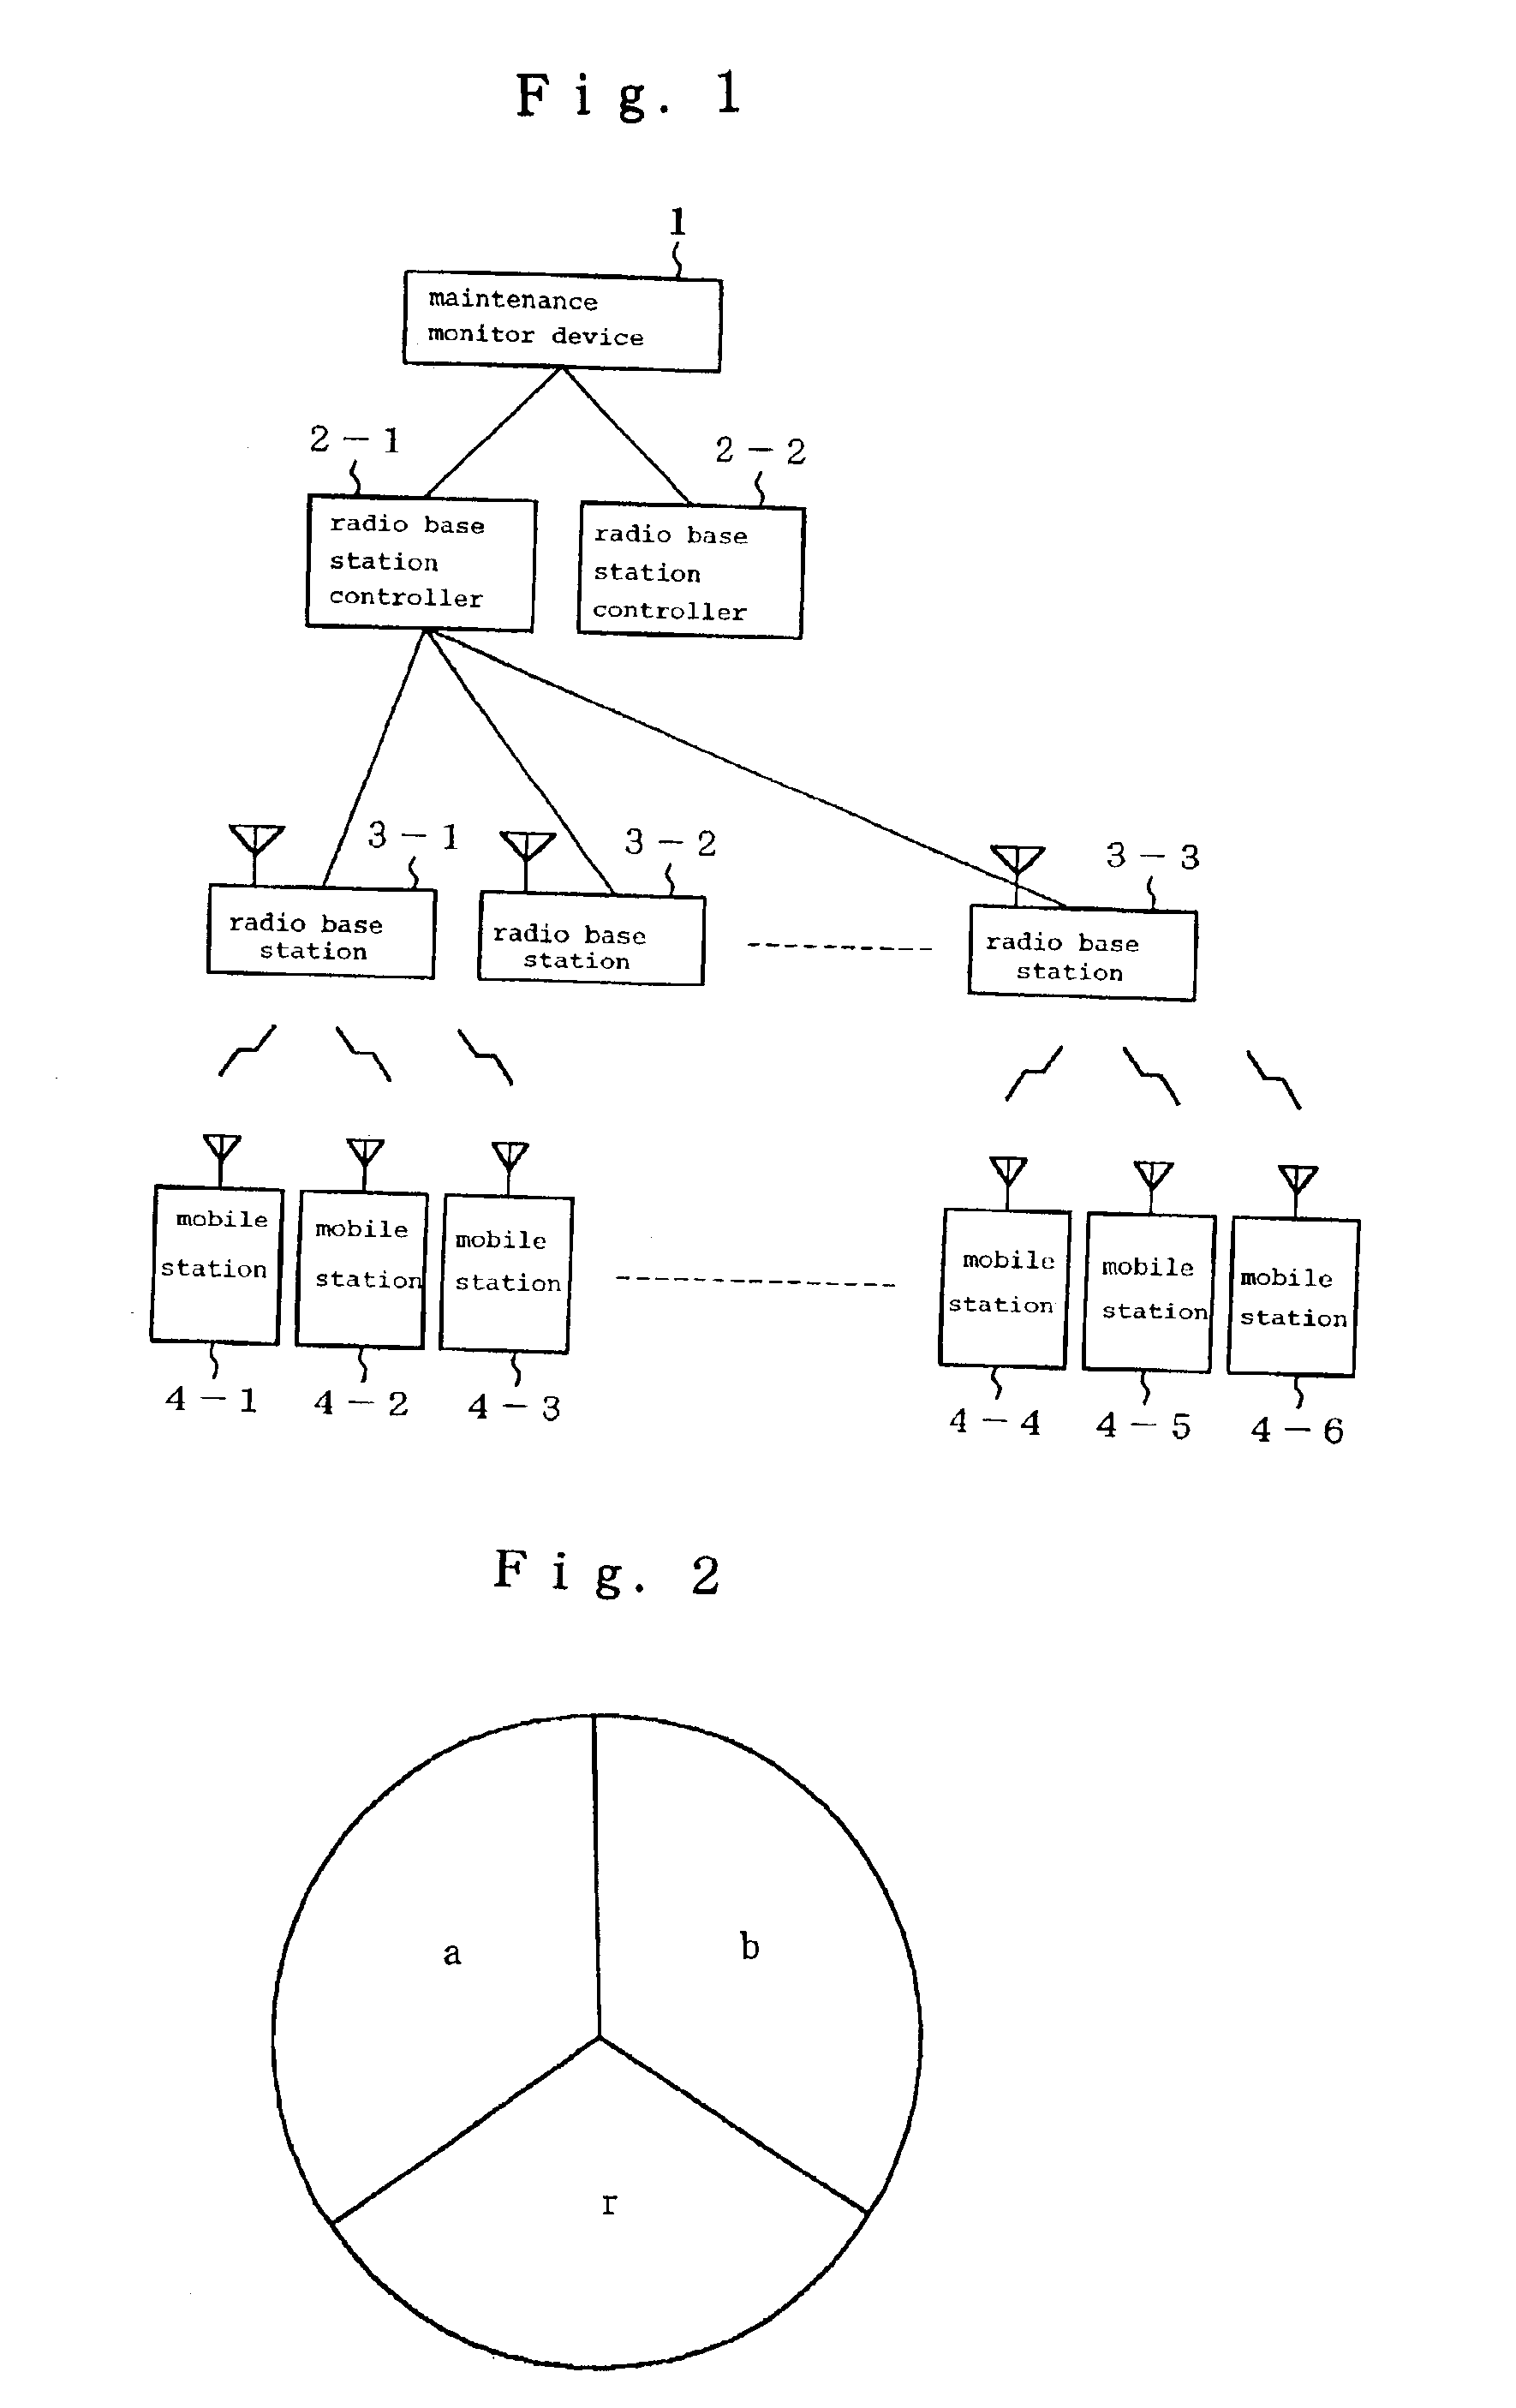 Radio base station for monitoring faults of radio communication modems based on content of received frames that are received during call connections